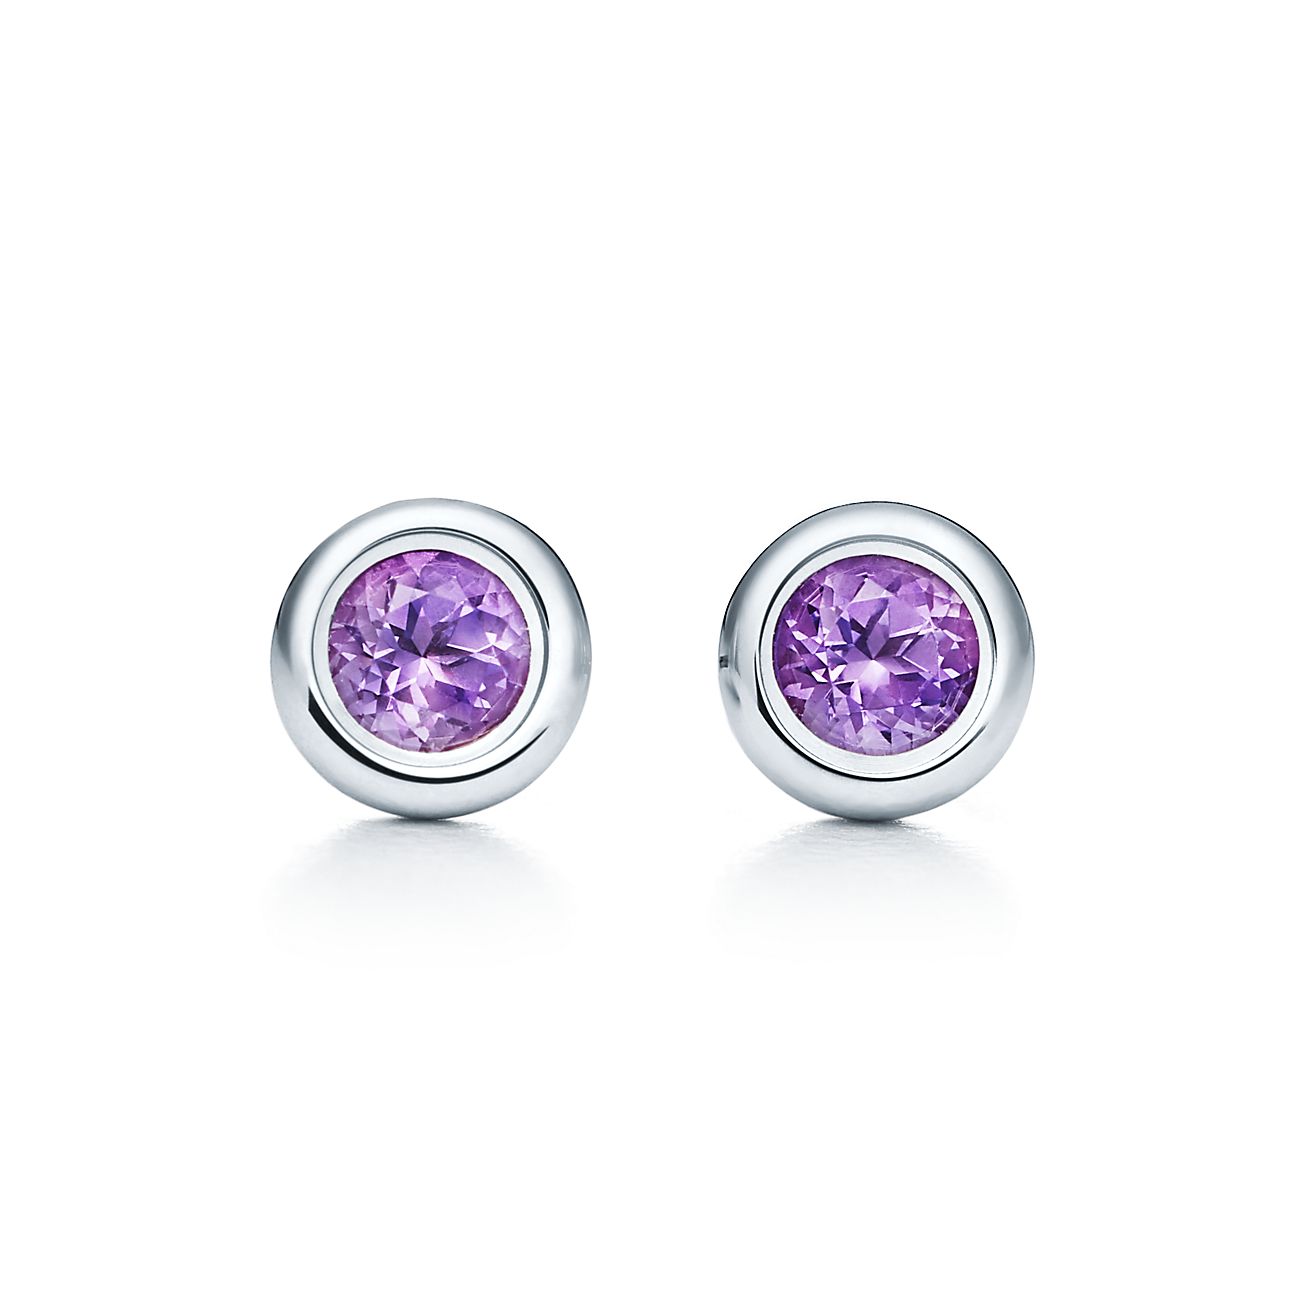 Buy Tiffany  Co Amethyst Color by the Yard Earrings Online in India  Etsy